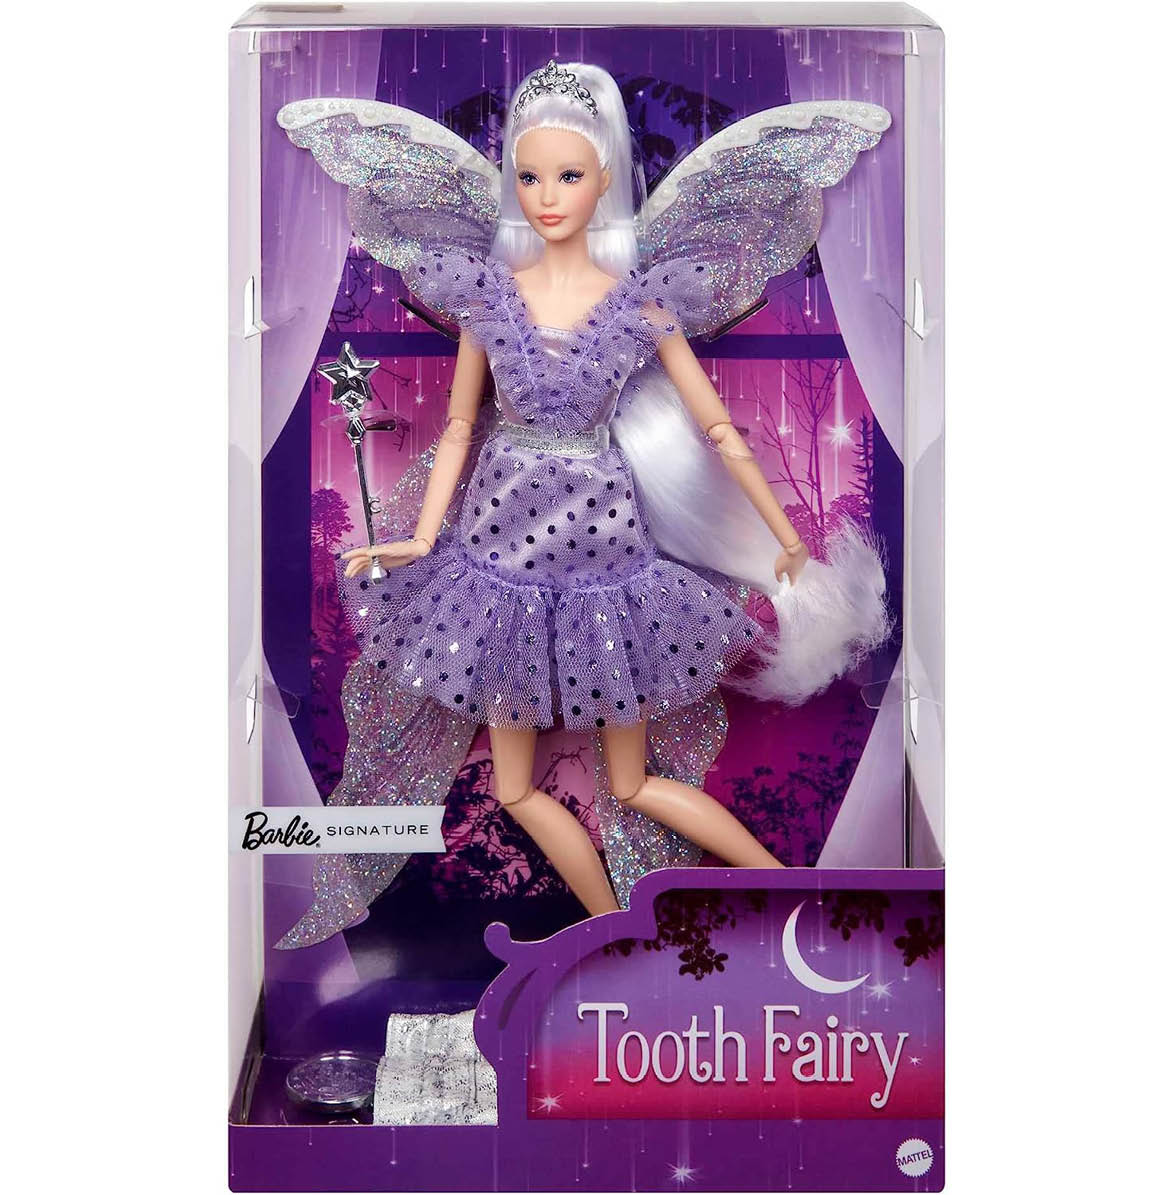 Barbie Tooth Fairy in box